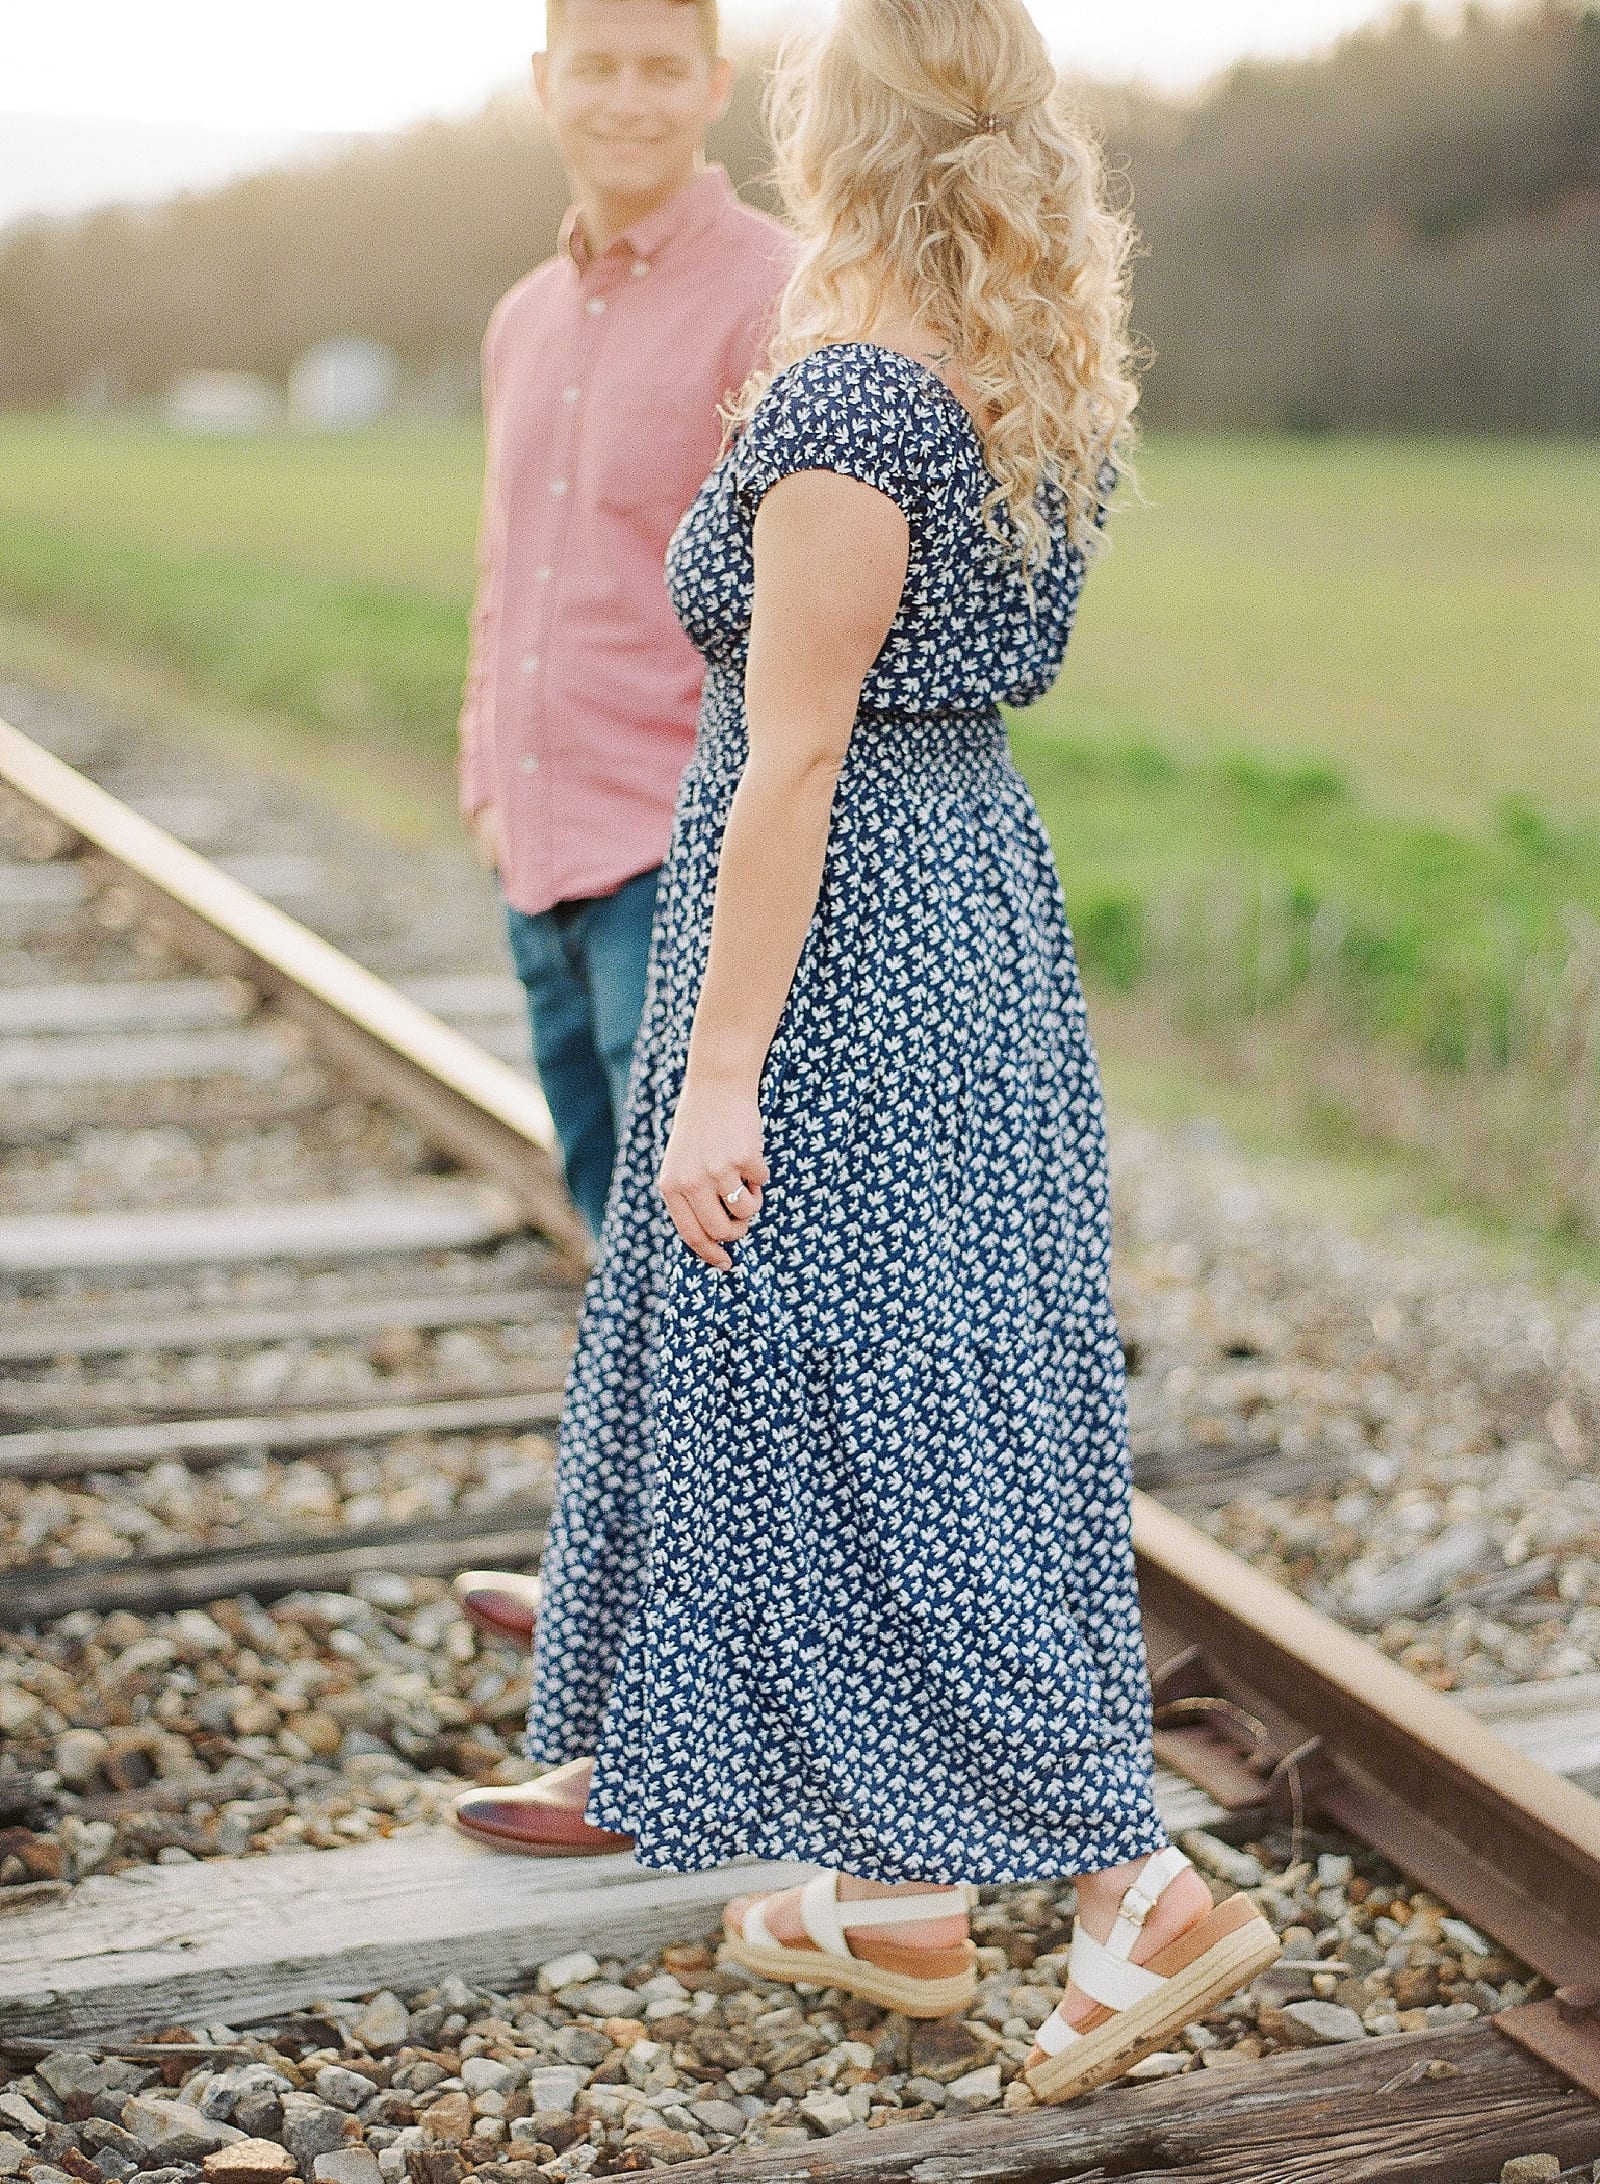 Couple smiling at each other walking photo